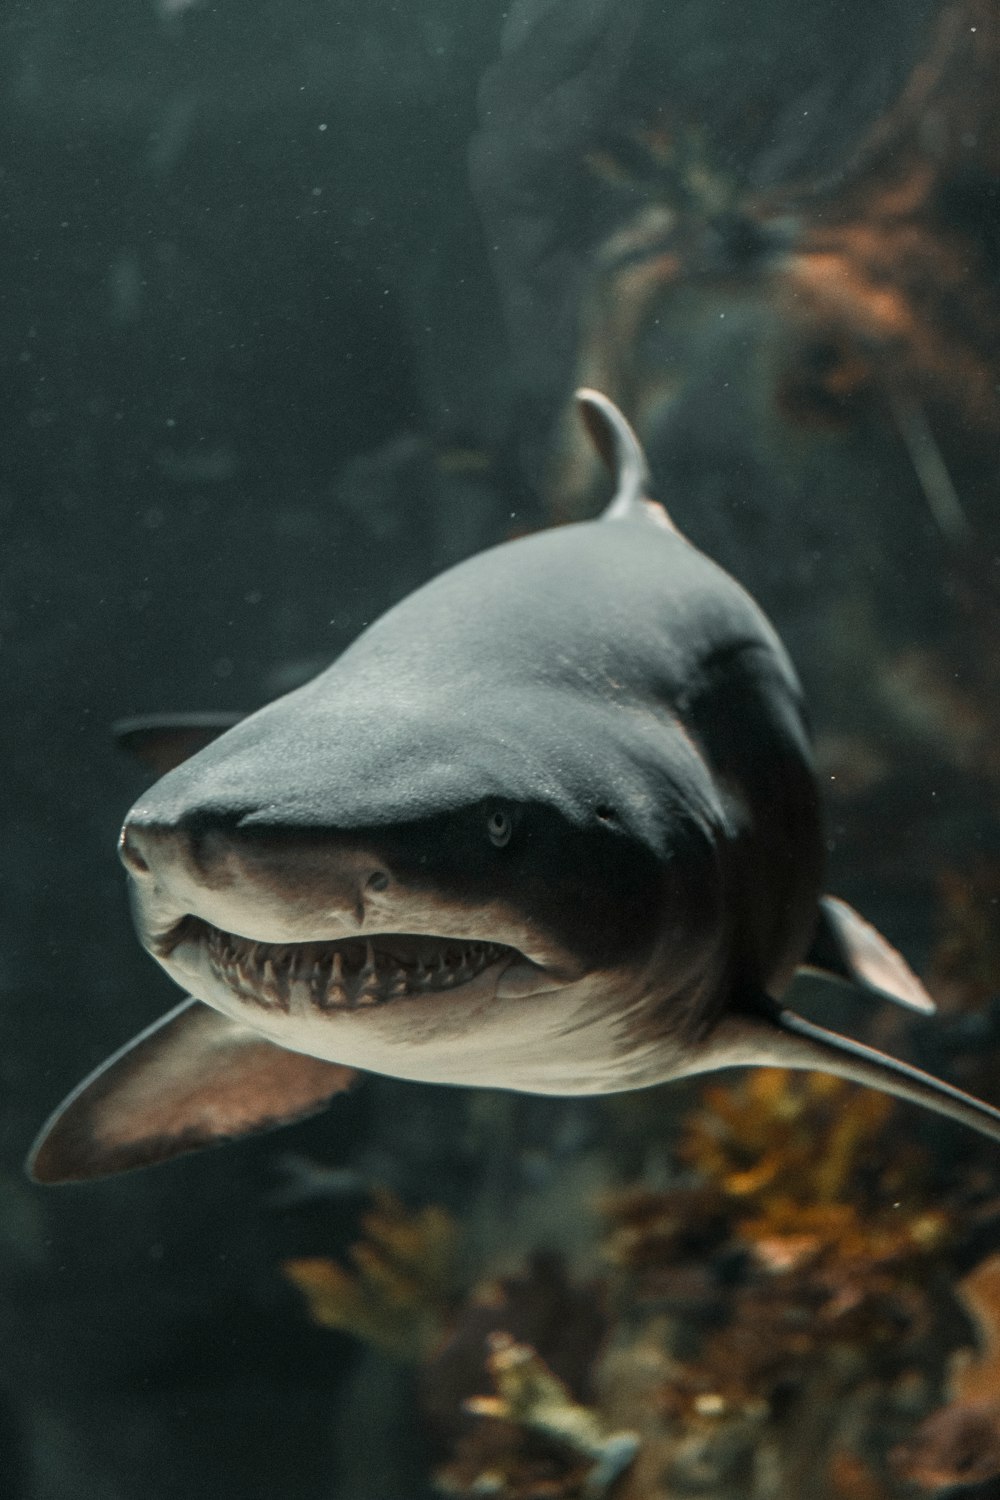 a shark swimming in an aquarium with its mouth open